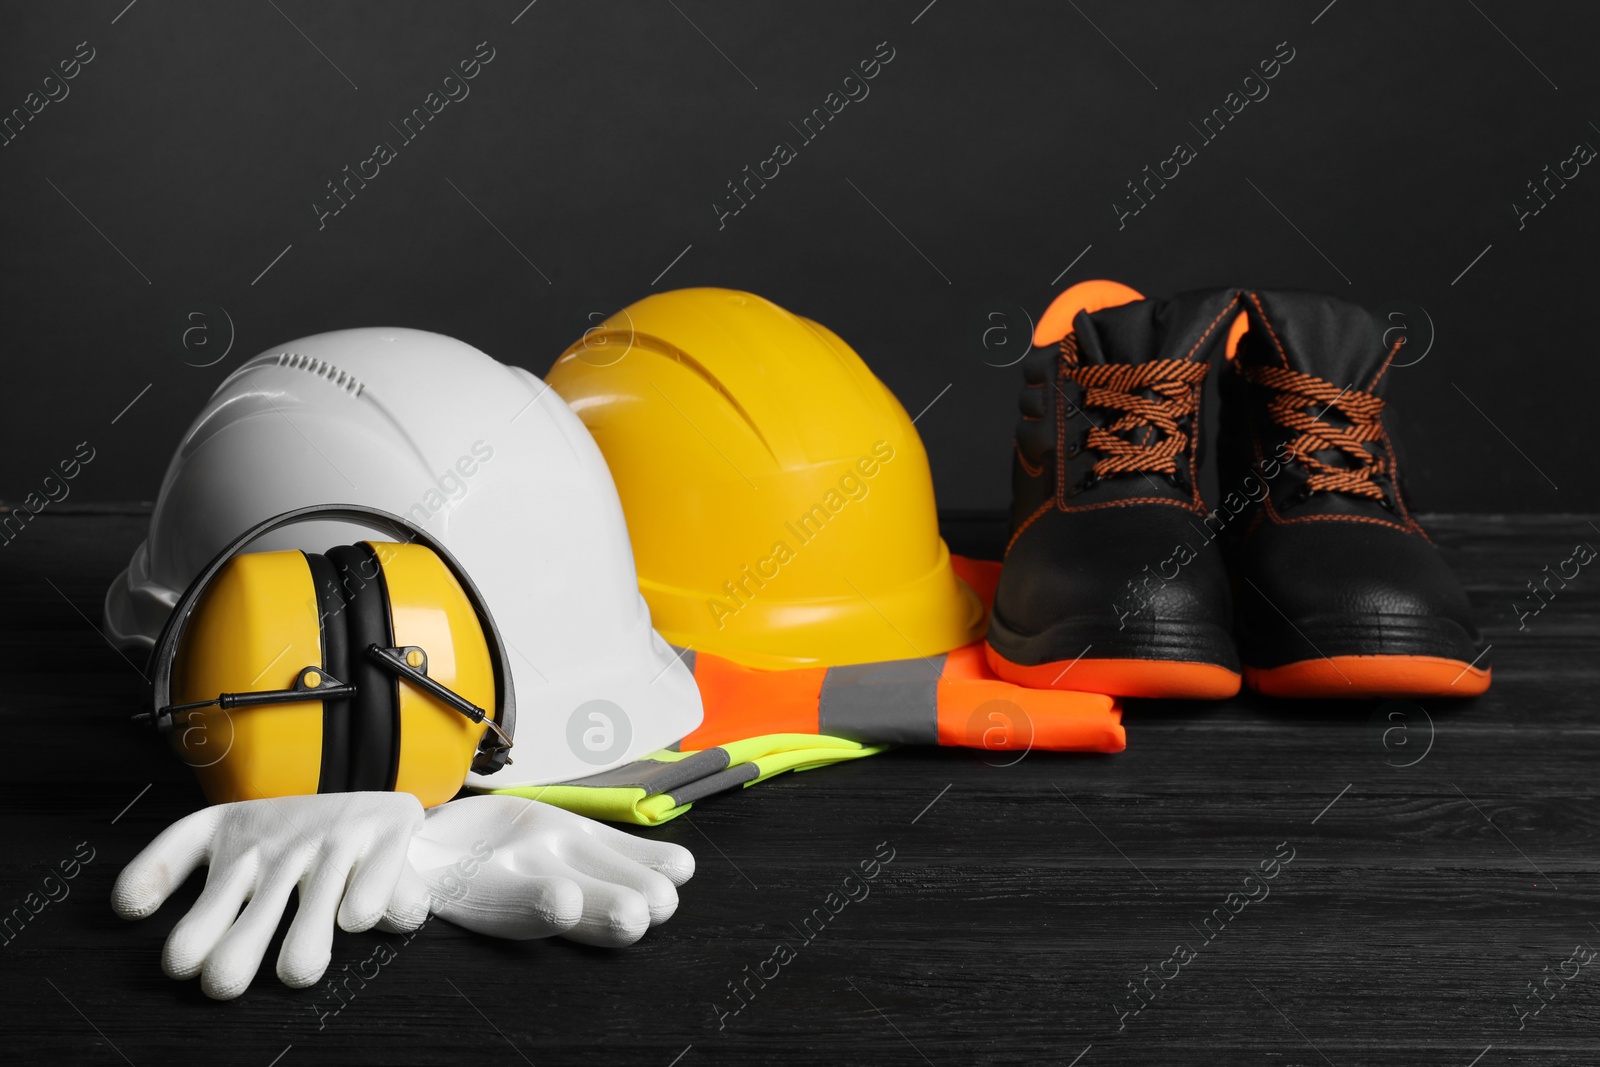 Photo of Pair of working boots, hard hats, protective gloves, earmuffs and reflective vests on black wooden surface against gray background